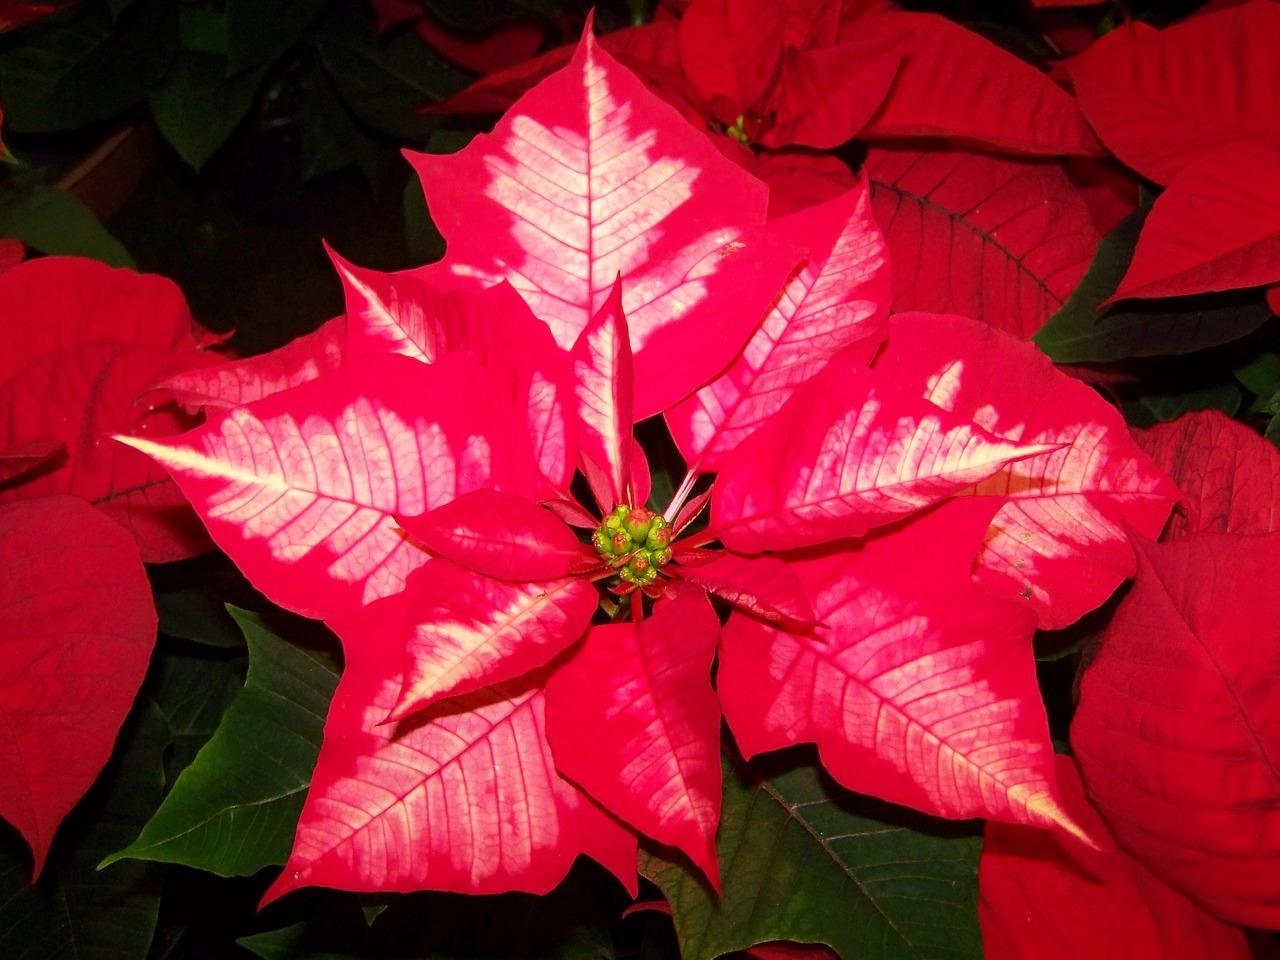 Close-up photo of a poinsetia